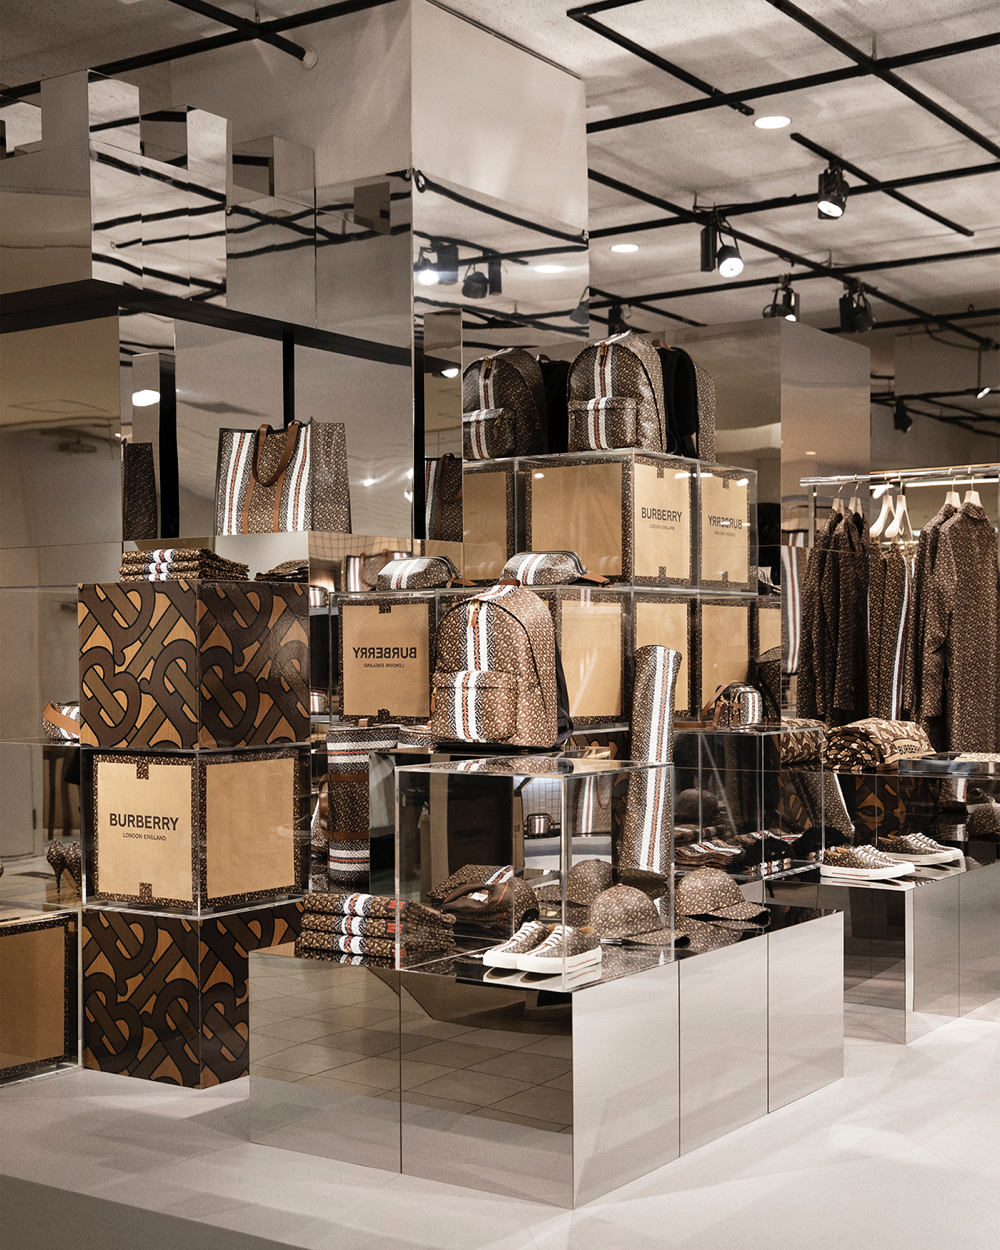 Tokyo: Burberry pop-up store – superfuture®